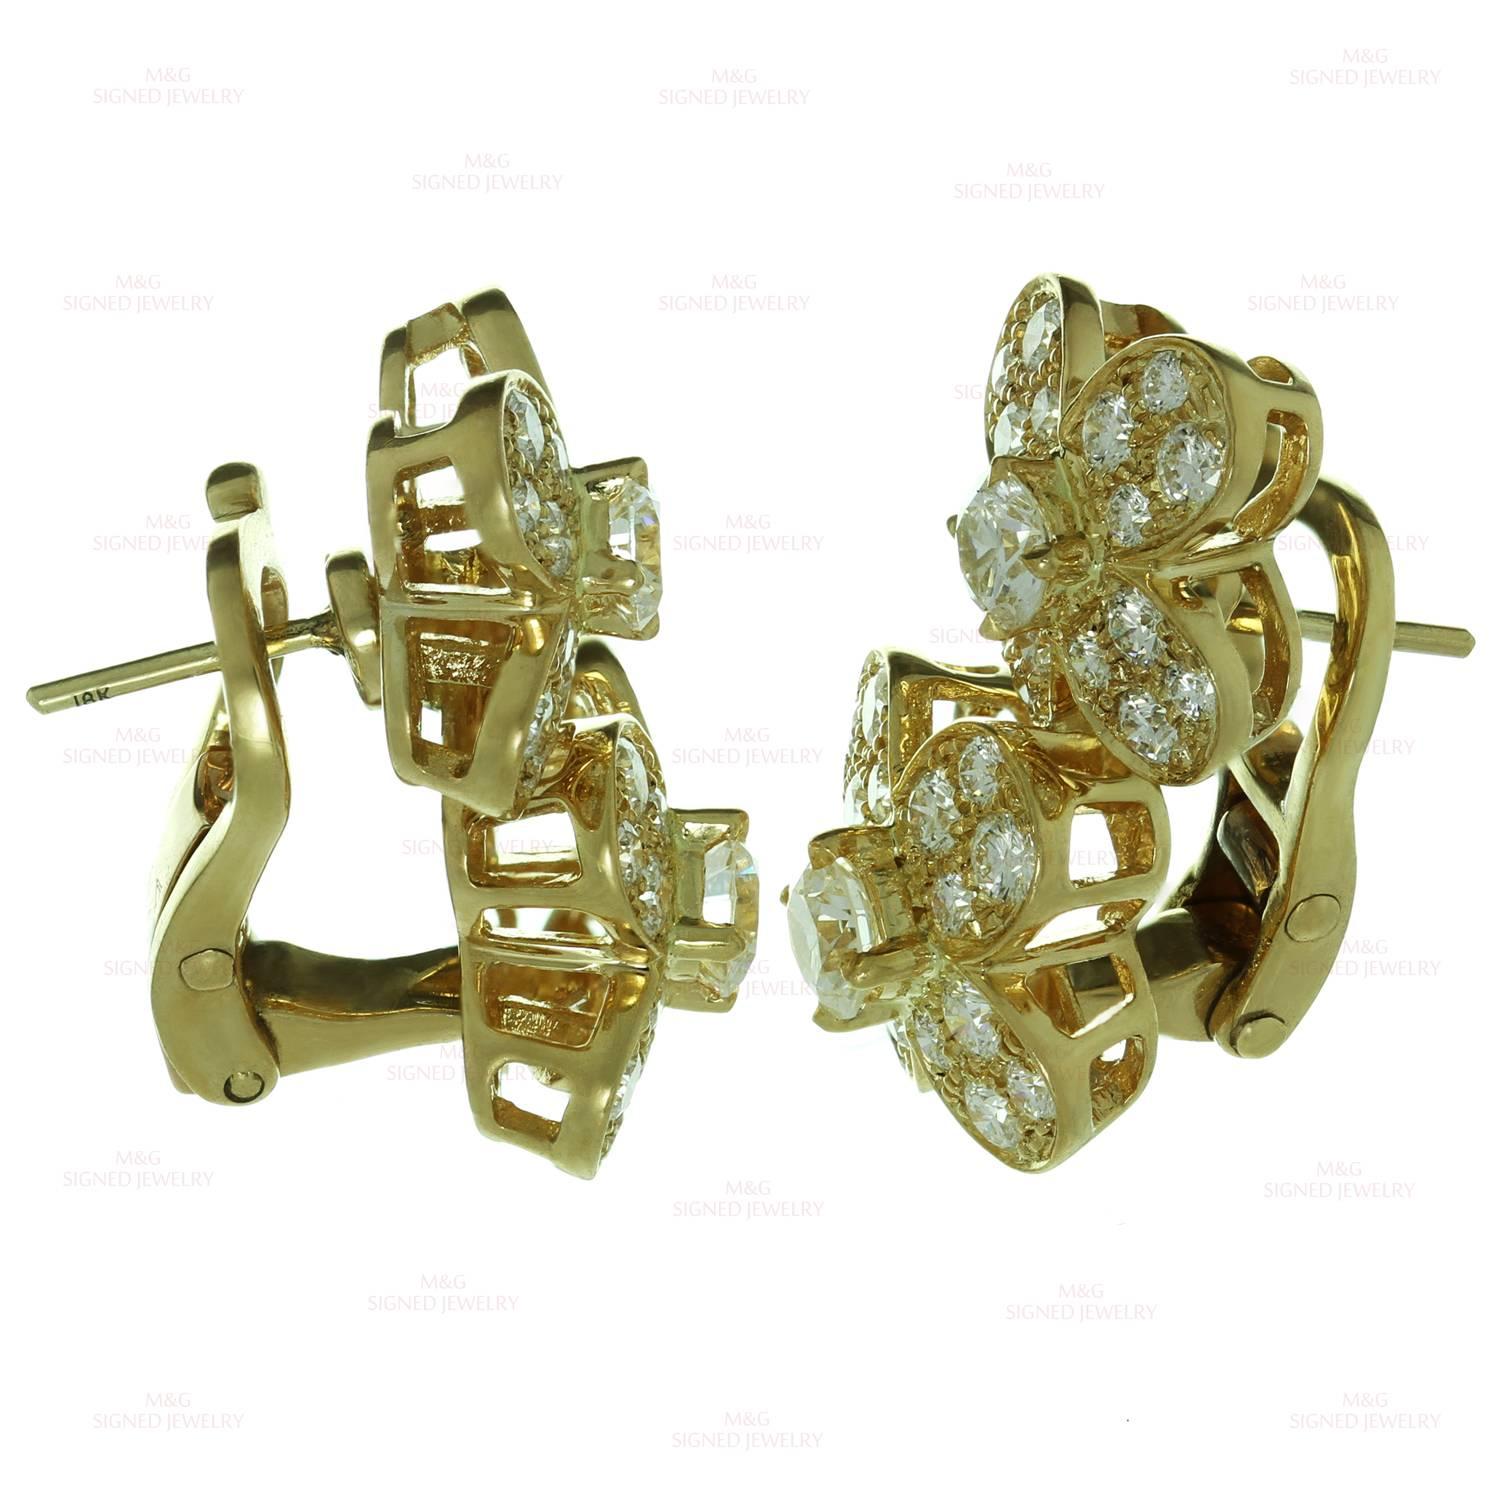 These exquisite Van Cleef & Arpels earrings from the classic Trefle collection feature a 2-flower design crafted in 18k yellow gold and accented with brilliant-cut round diamonds. Made in France circa 2000s. Measurements: 0.47